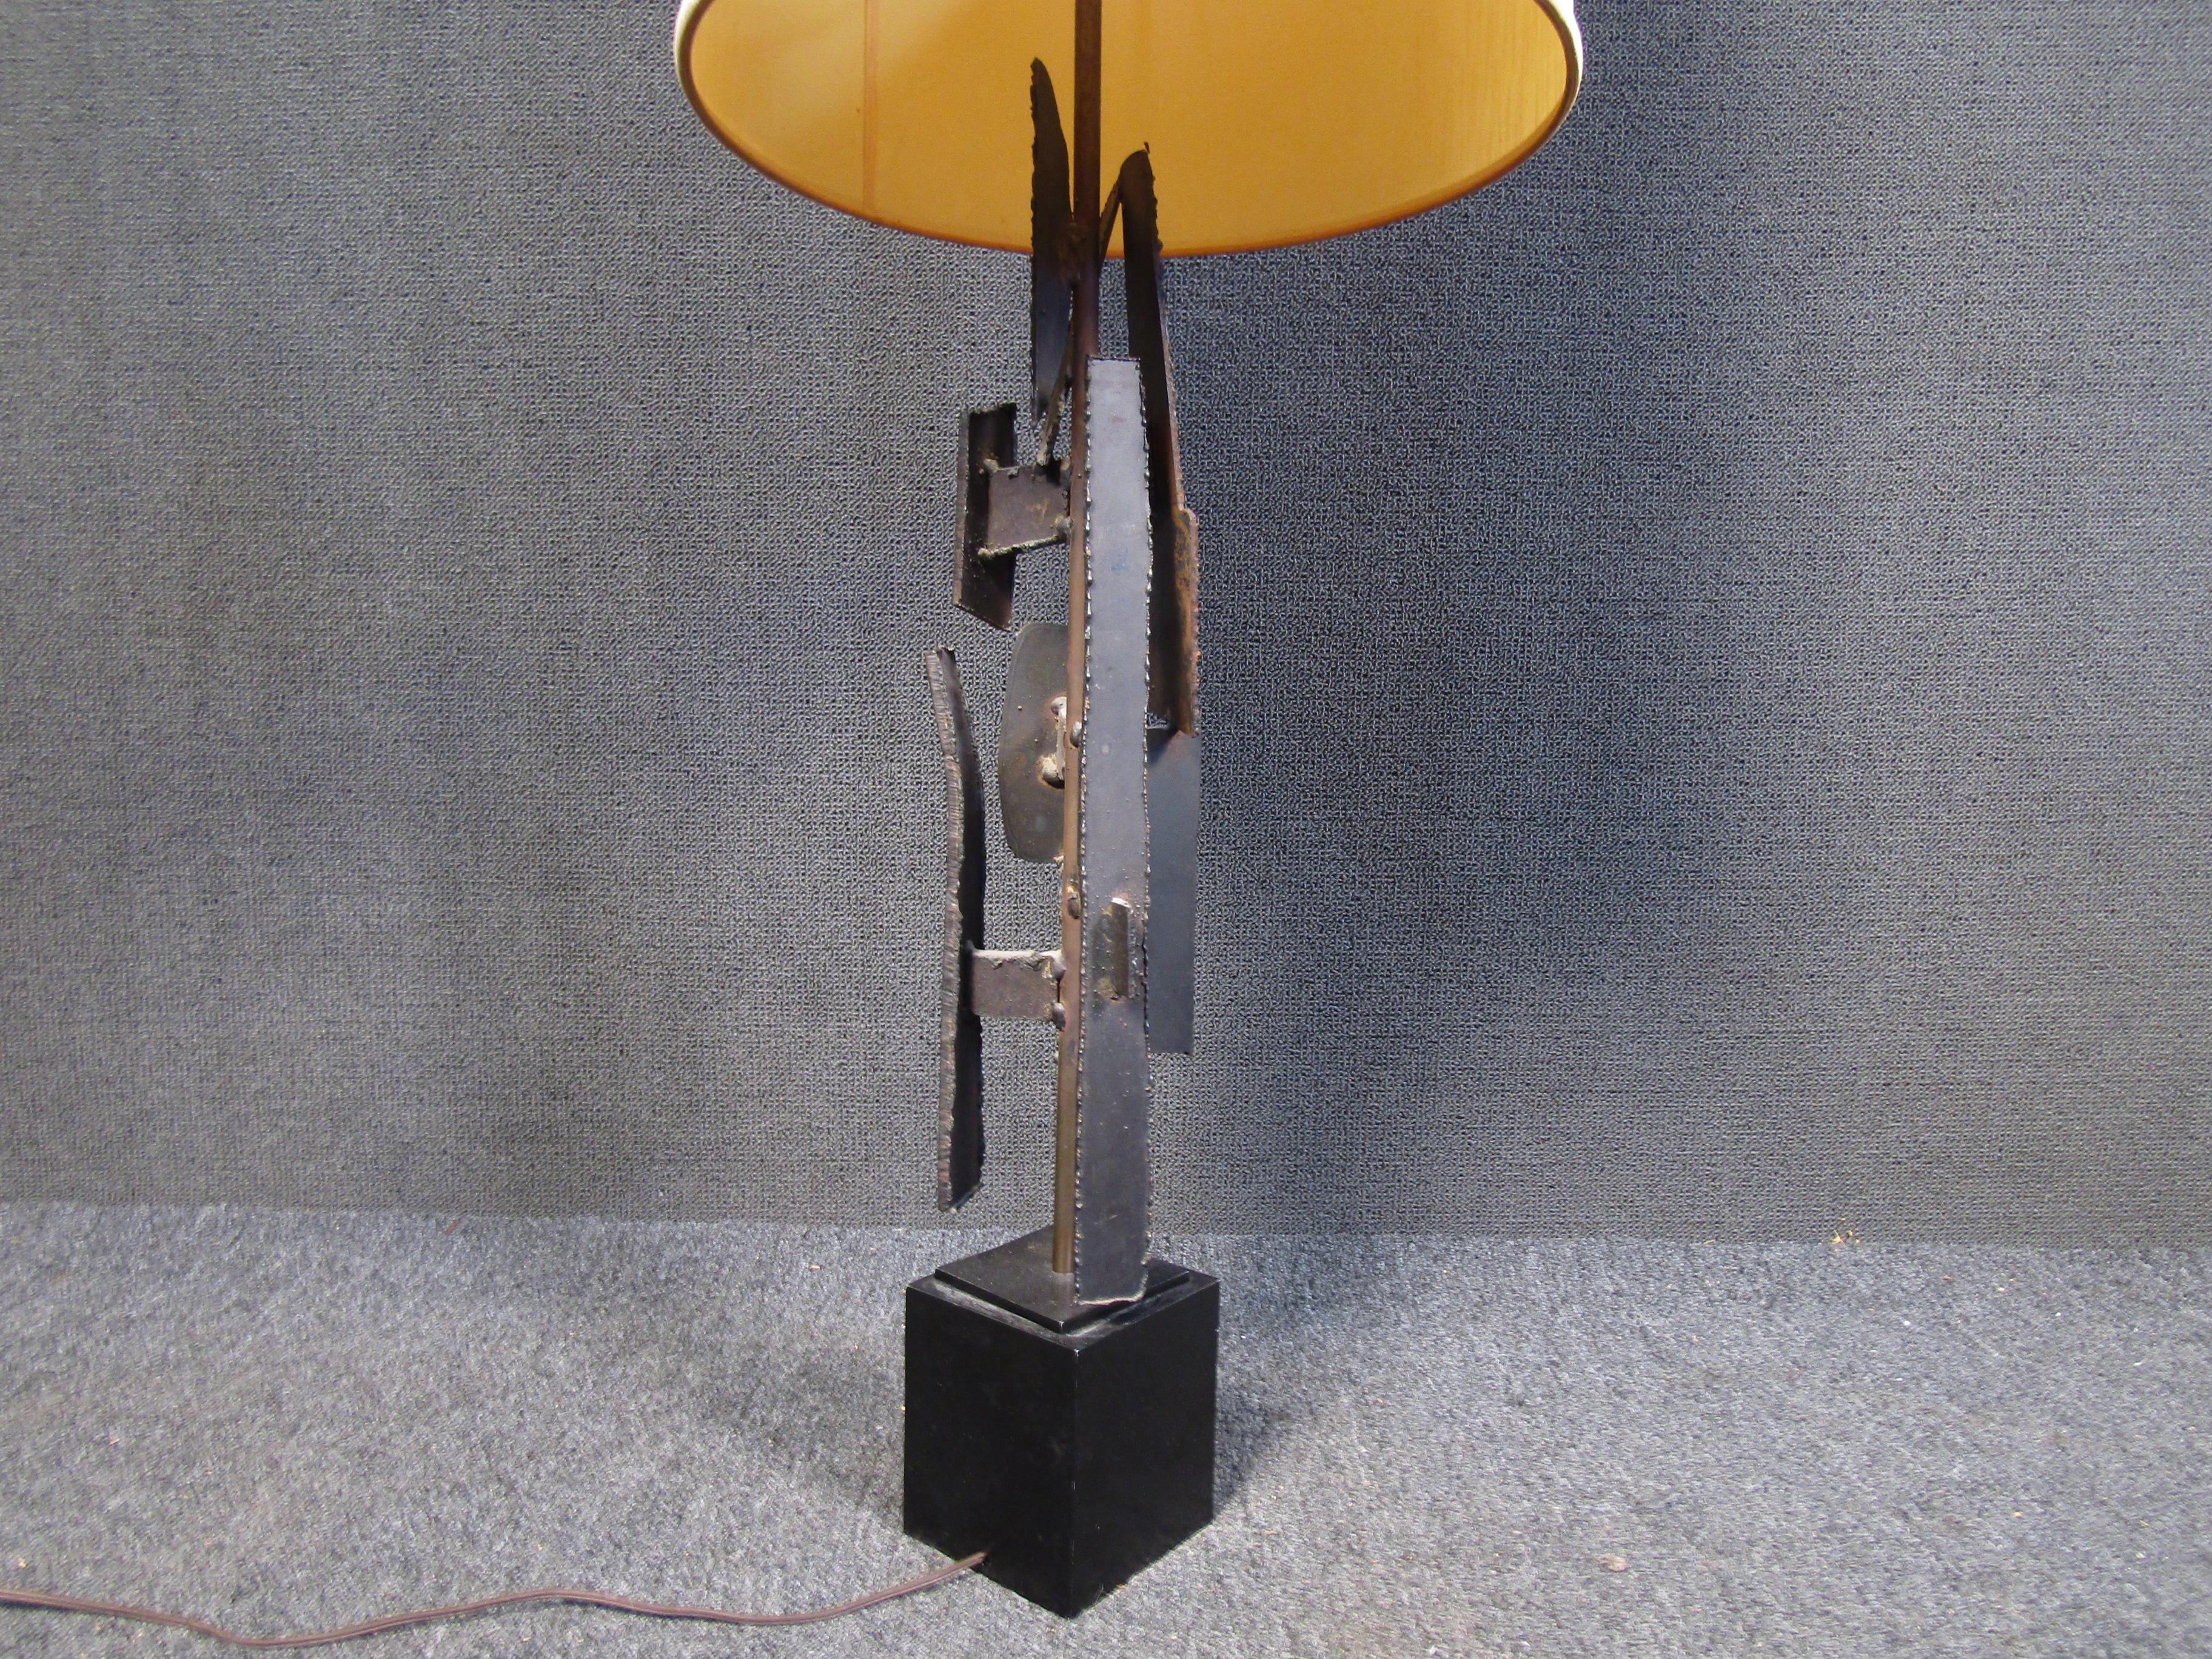 Designed by Richard Barr for Laurel Lamp Co. this Iron brutalist lamp is wrought iron and comes with the shade. 
Please confirm item location (NJ or NY).